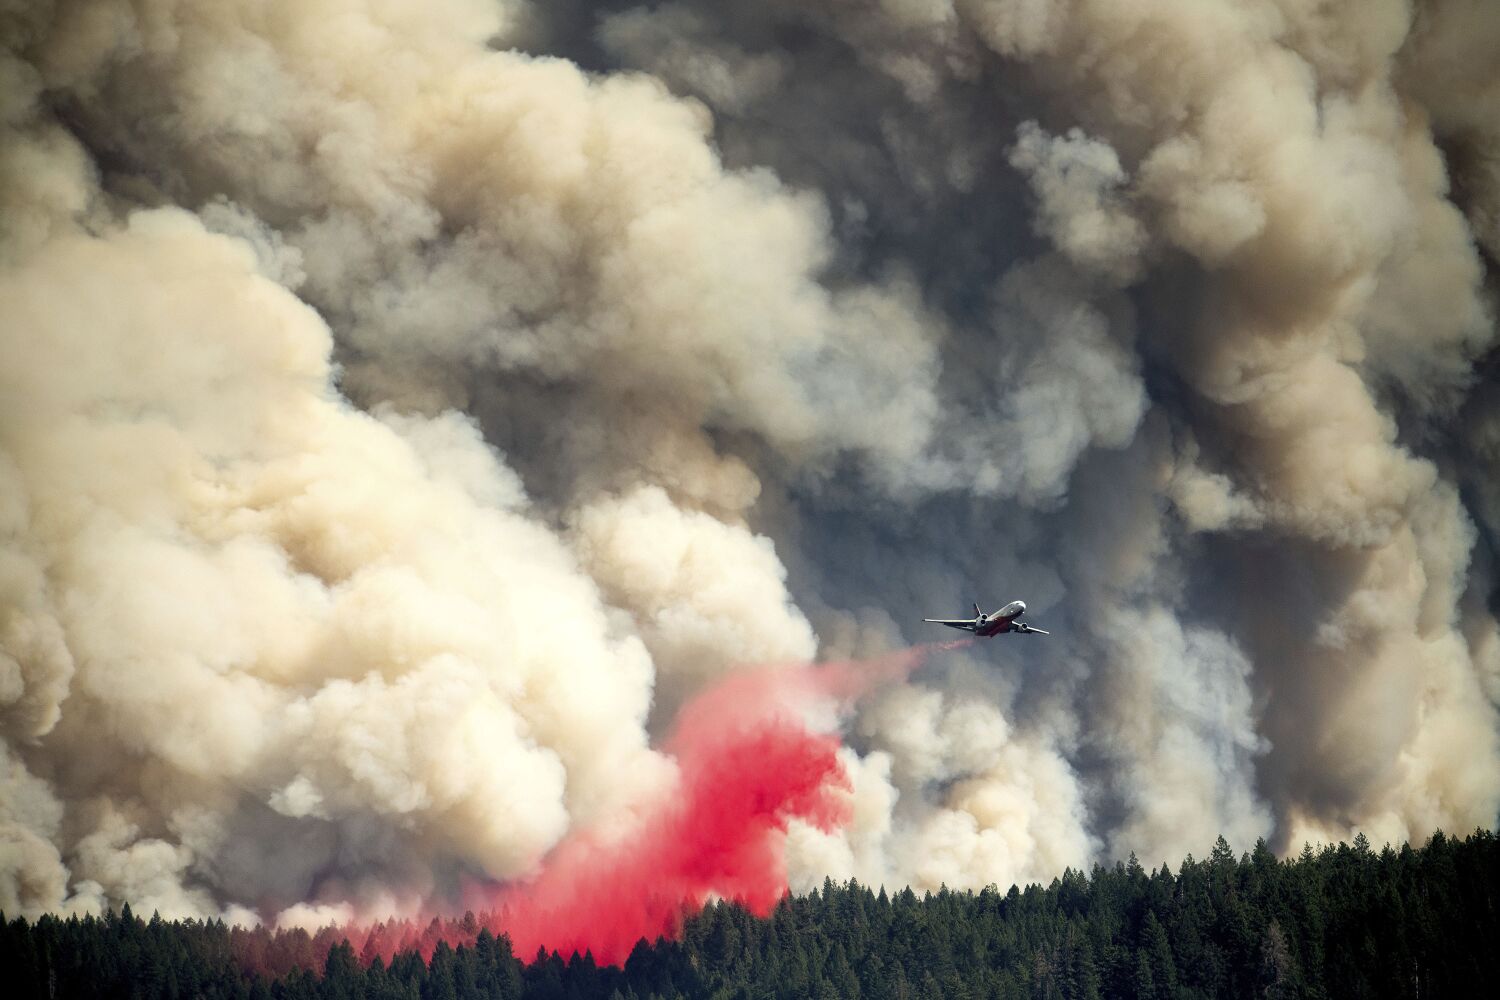 California's heat wave fueling destructive fires. The worst is yet to come, officials fear